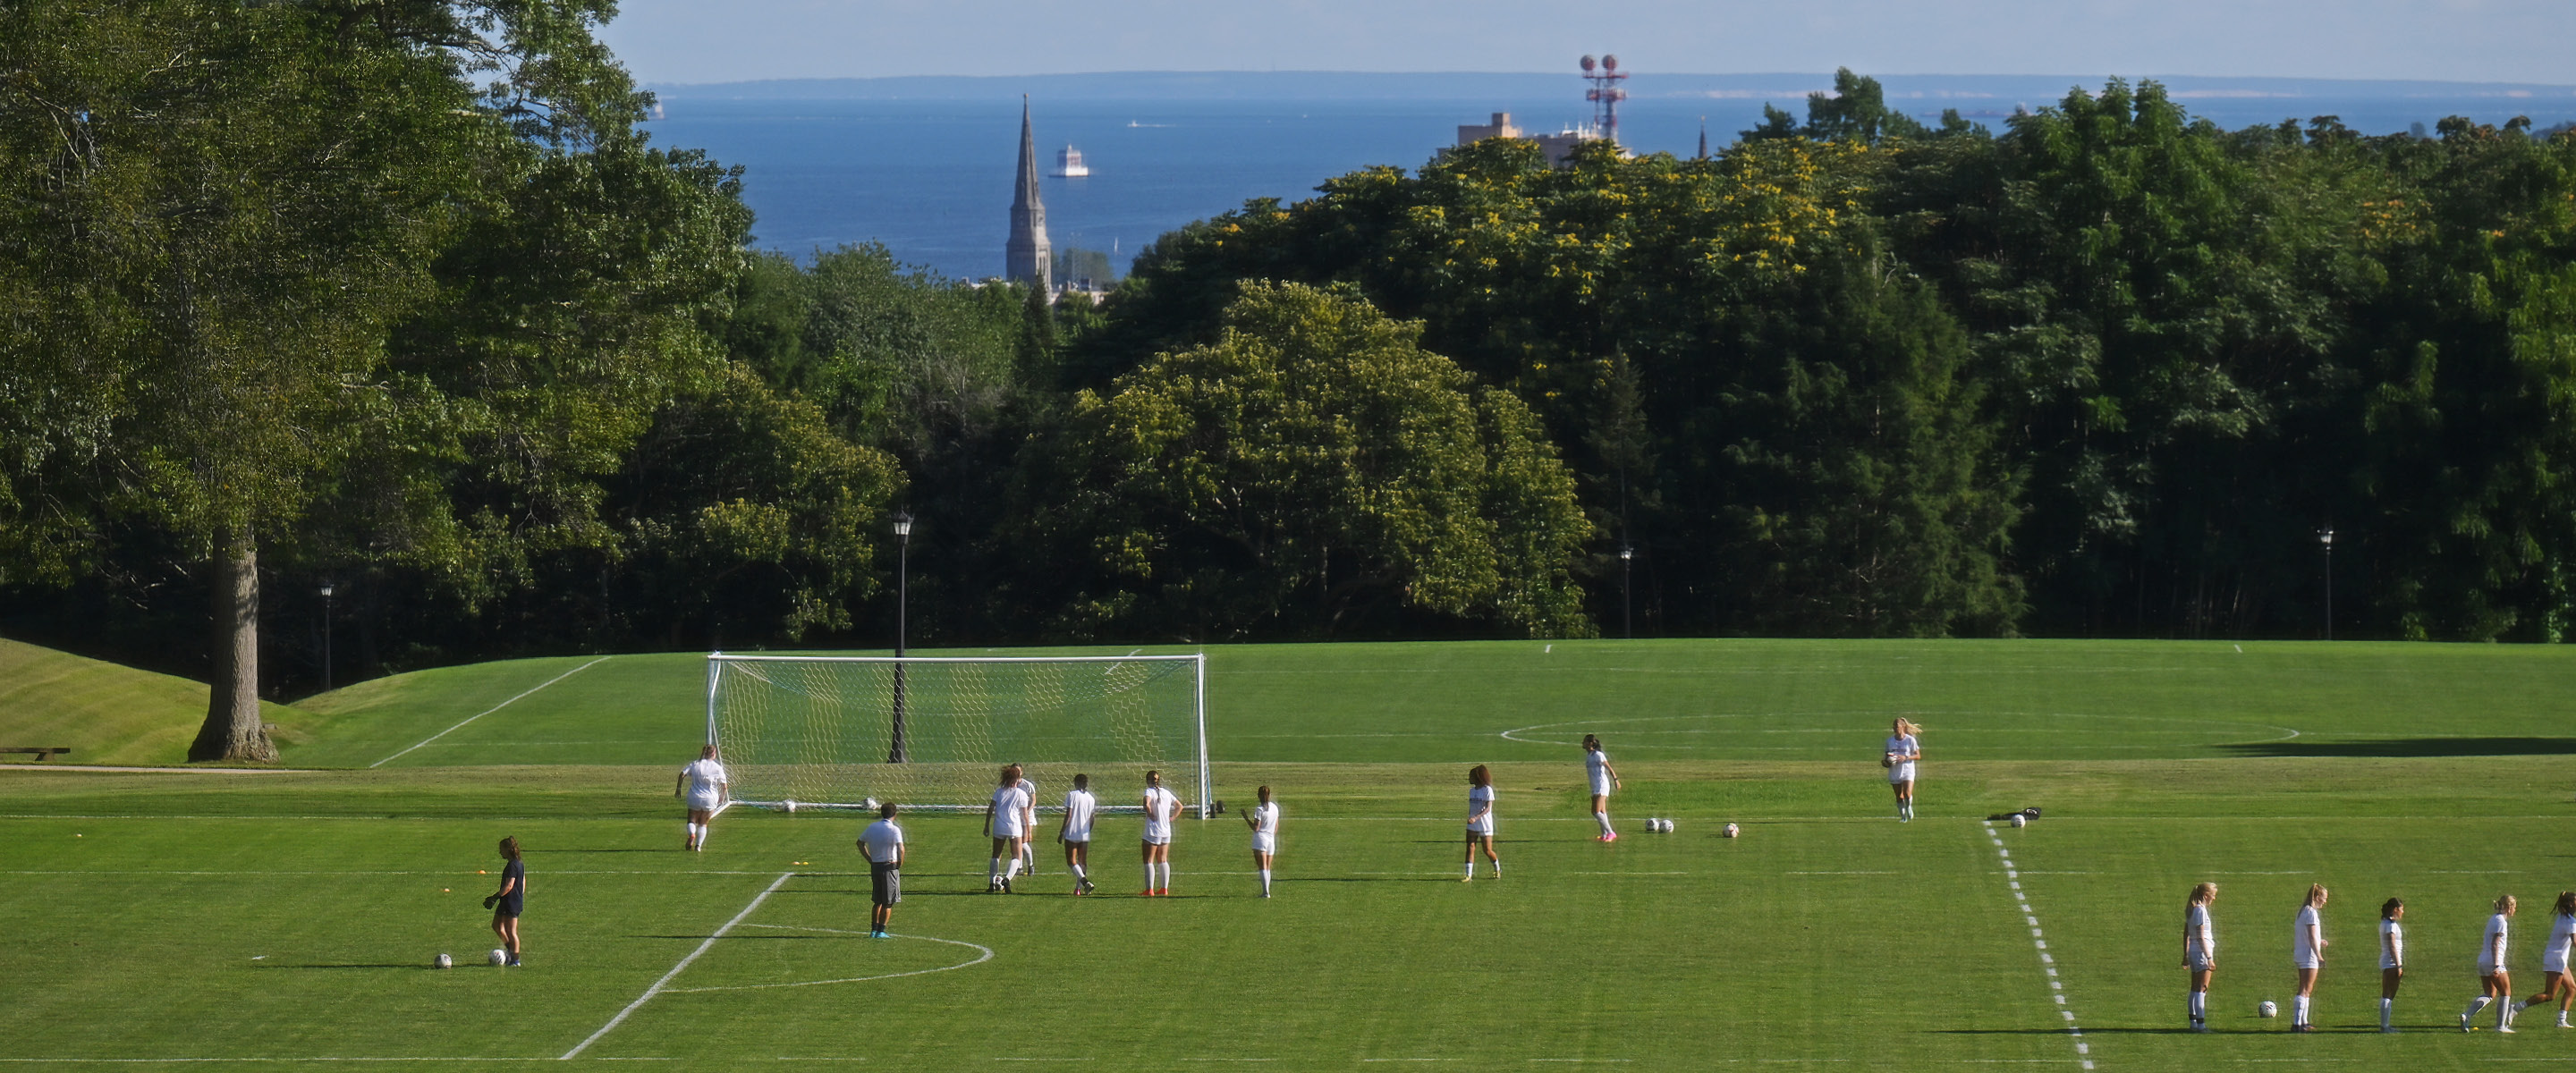 Panoramic shot of the Green with soccer practice on the field and Long Island Sound in the background.